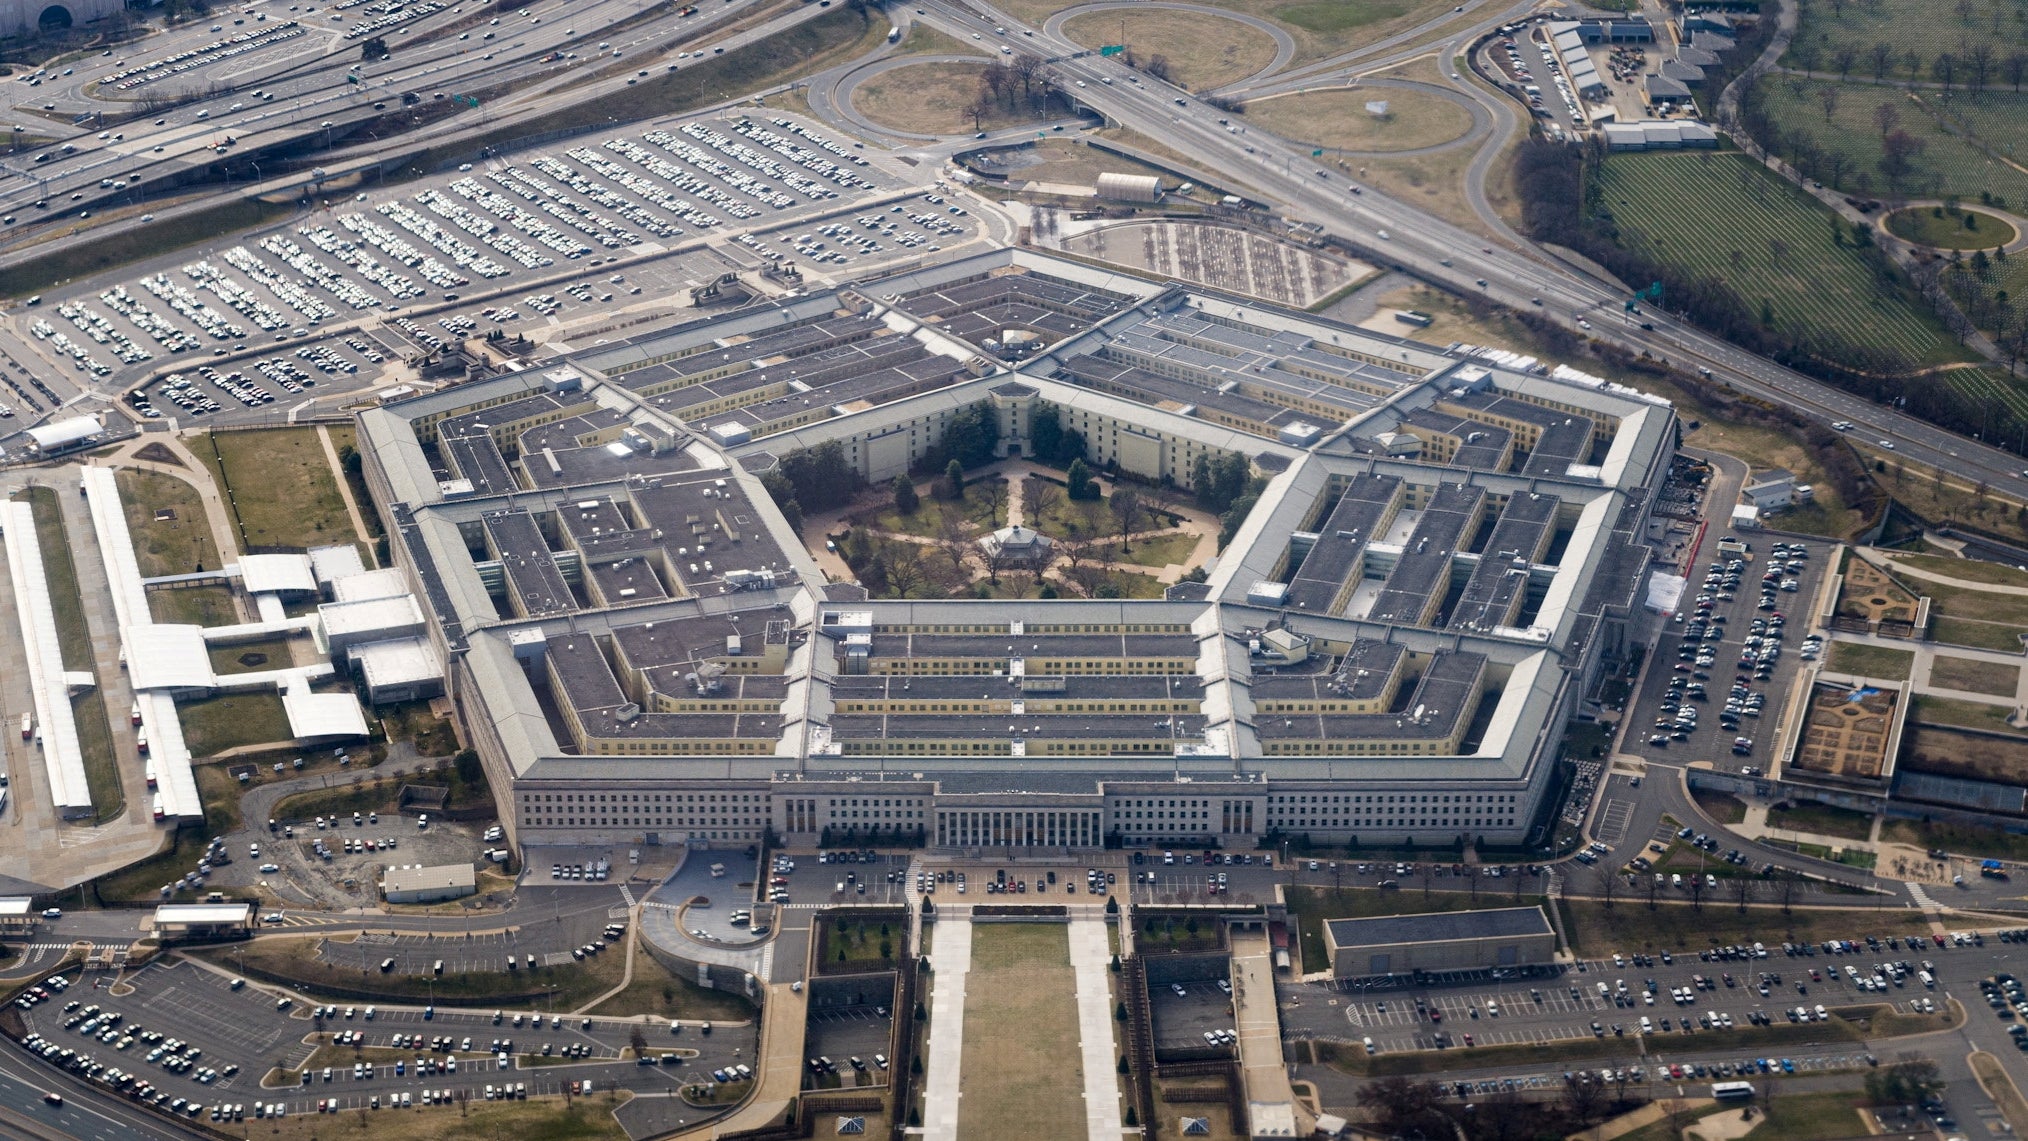 1.25 million people have top-level security clearance in the United States, including at the Pentagon